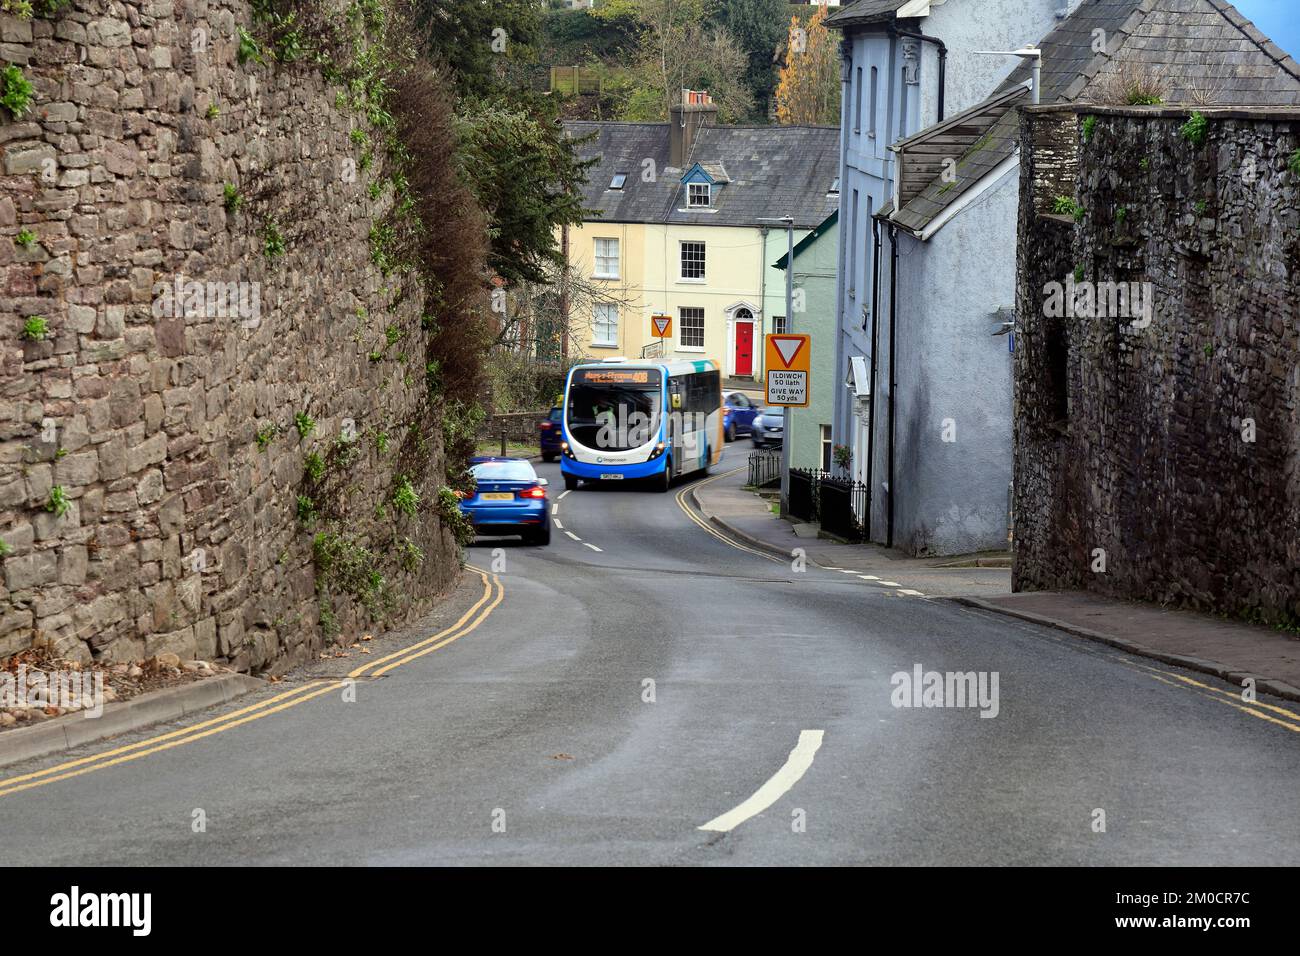 Rural bus wending its way around a winding road in Brecon town. 40B Stagecoach route - Maes y Ffynnon bus Brecon, Powys, Wales. December 2022. Winter. Stock Photo